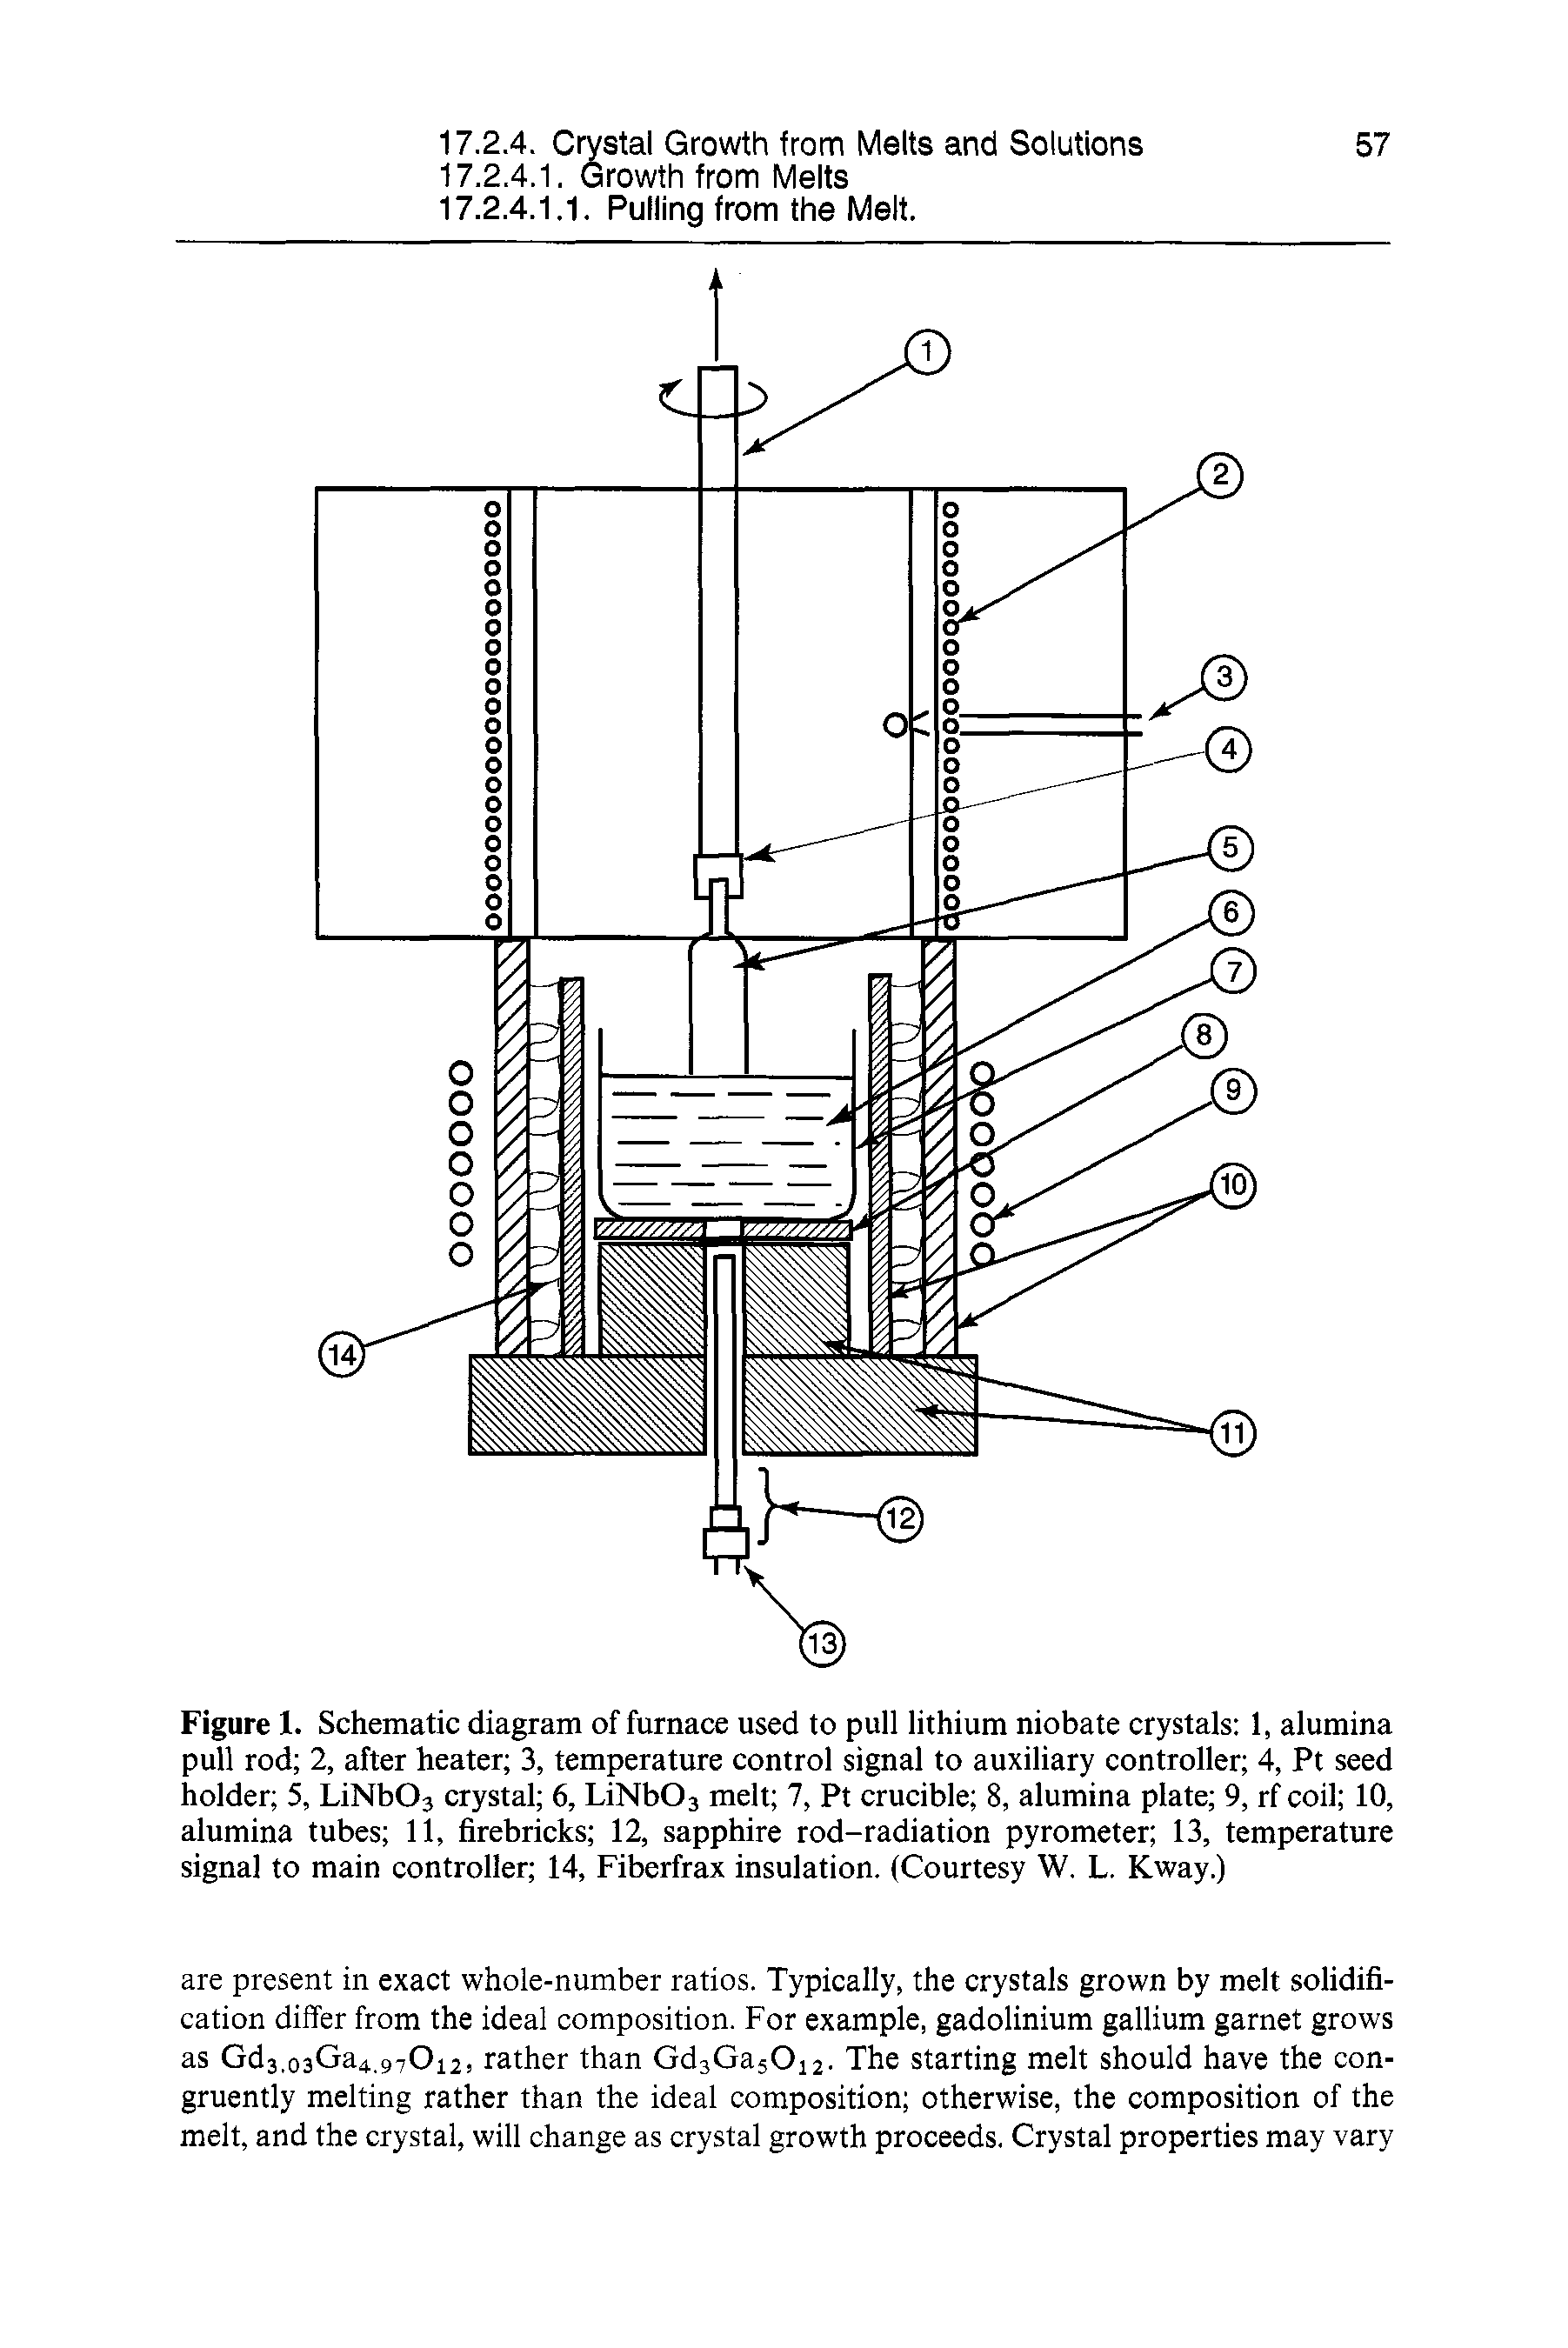 Figure 1. Schematic diagram of furnace used to pull lithium niobate crystals 1, alumina pull rod 2, after heater 3, temperature control signal to auxiliary controller 4, Pt seed holder 5, LiNbOj crystal 6, LiNbOs melt 7, Pt crucible 8, alumina plate 9, rf coil 10, alumina tubes 11, firebricks 12, sapphire rod-radiation pyrometer 13, temperature signal to main controller 14, Fiberfrax insulation. (Courtesy W. L. Kway.)...